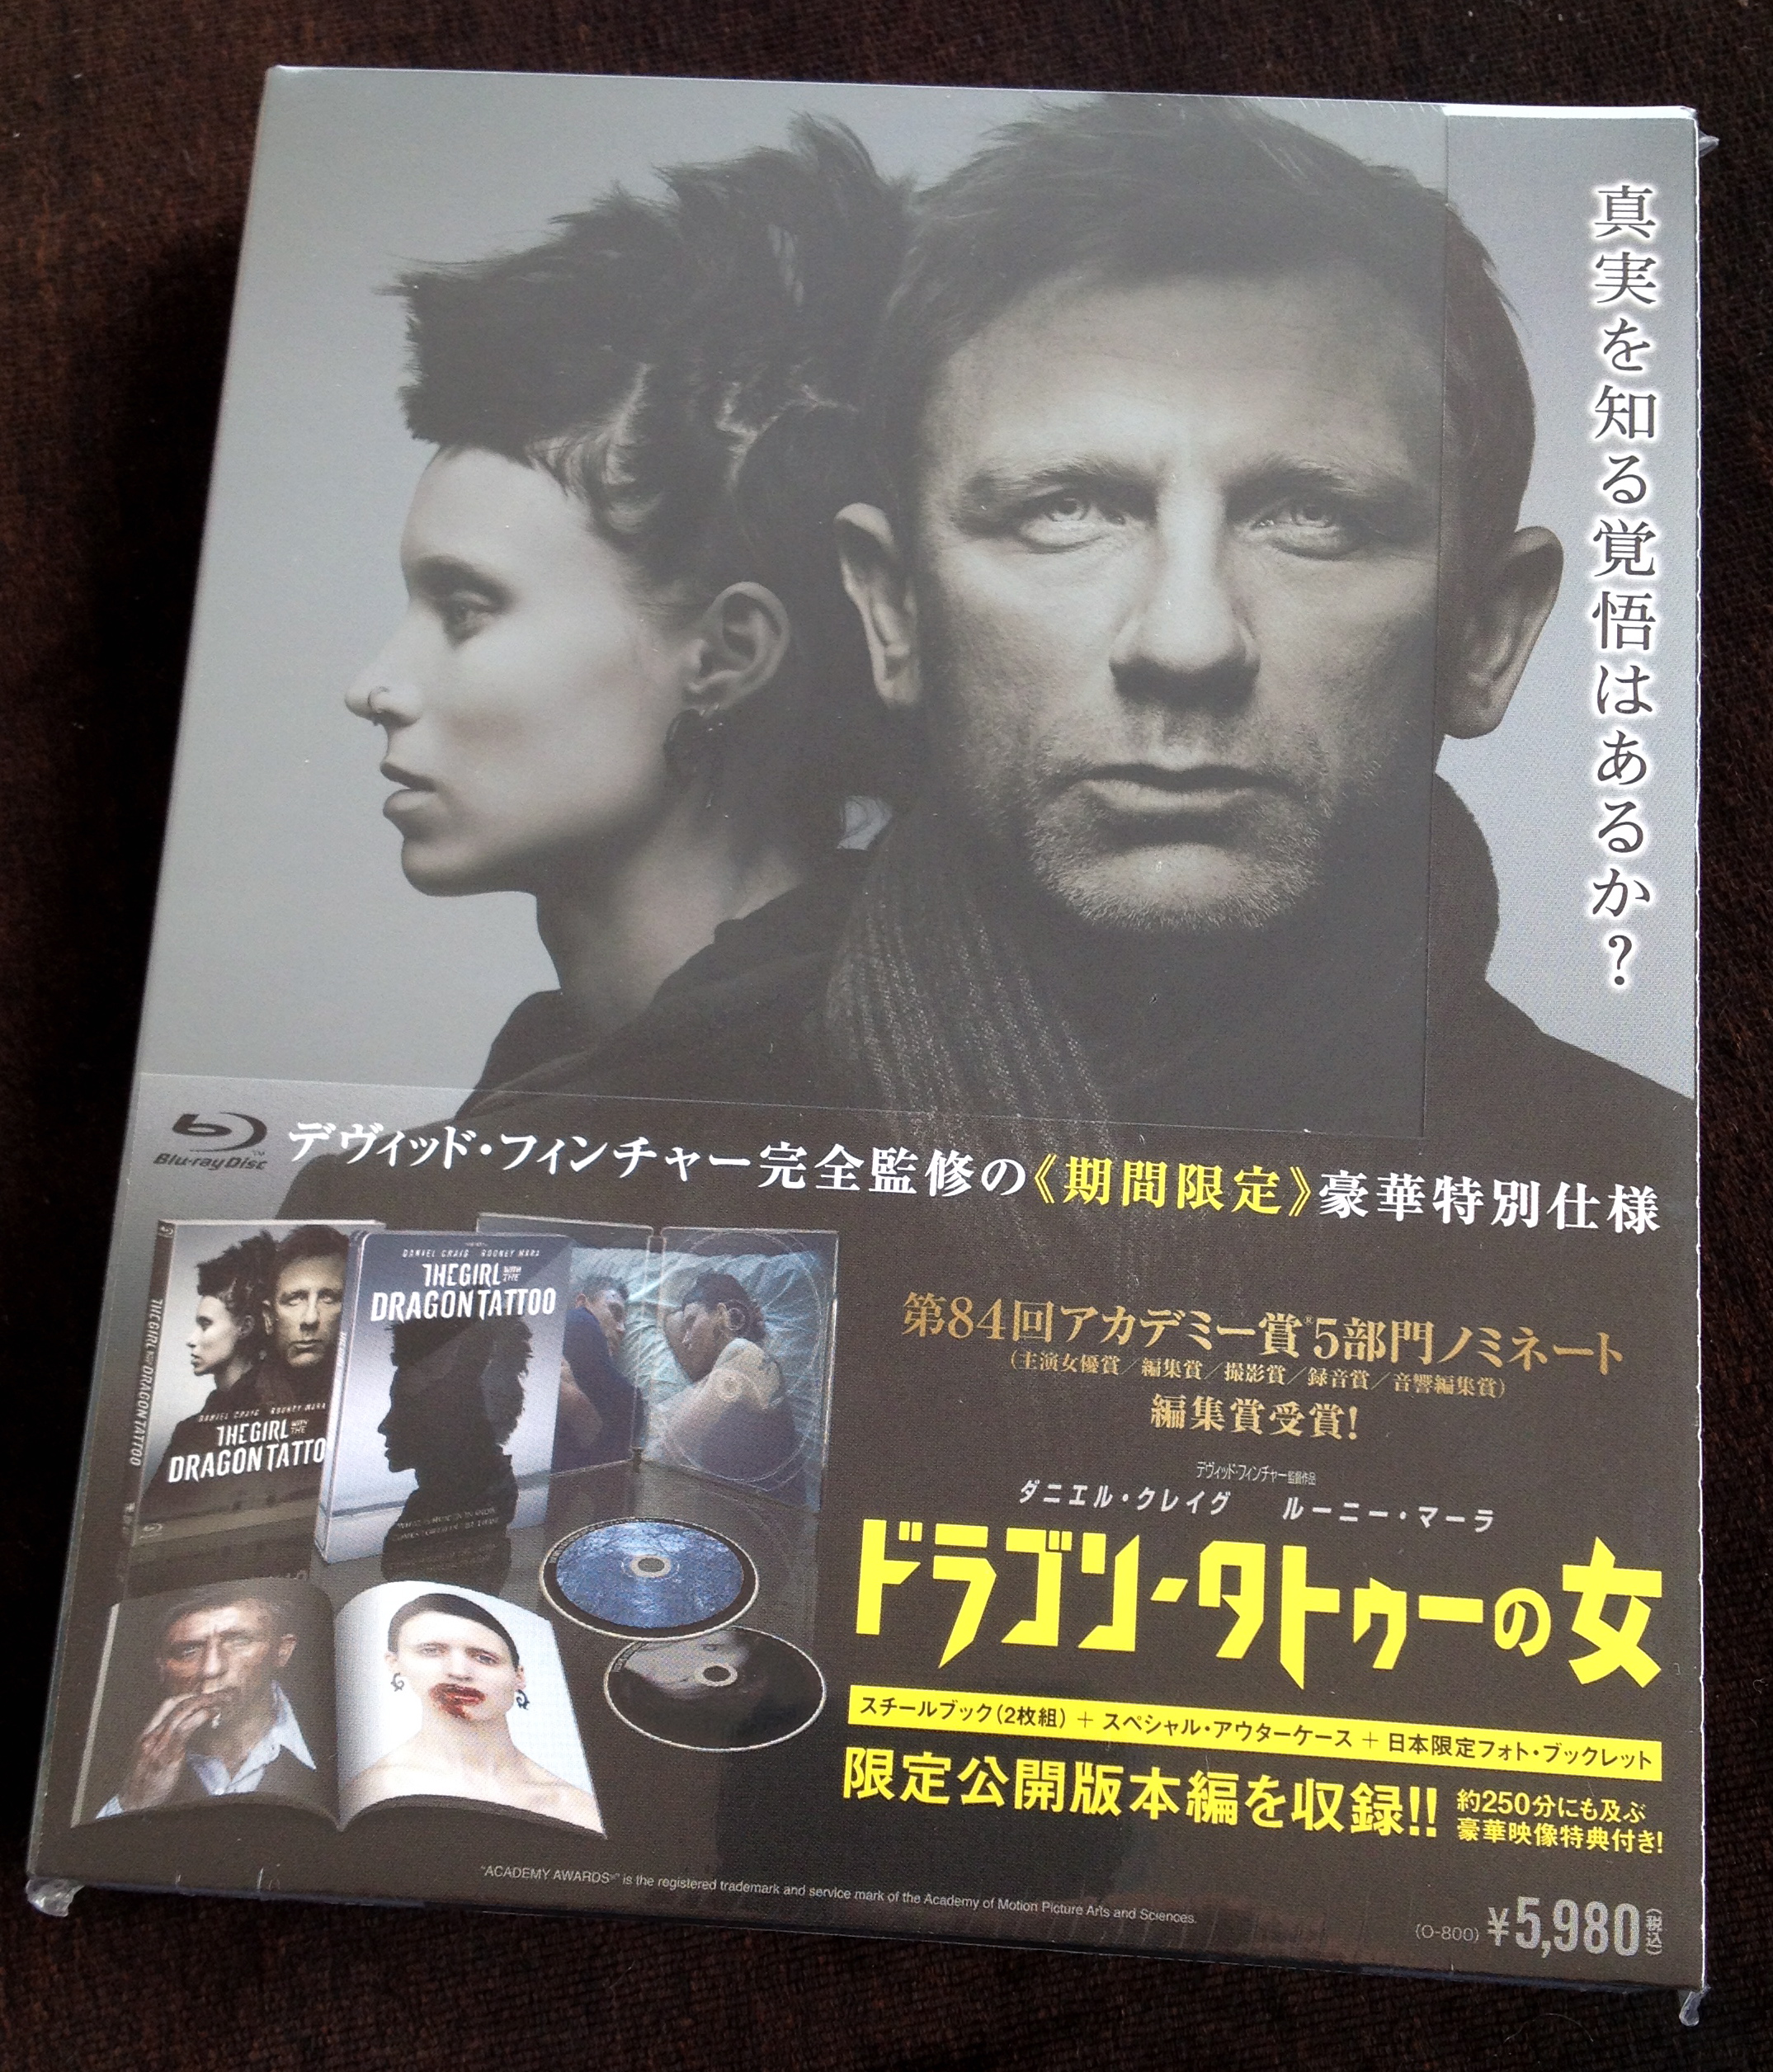 THE GIRL WITH THE DRAGON TATTOO (Japan)